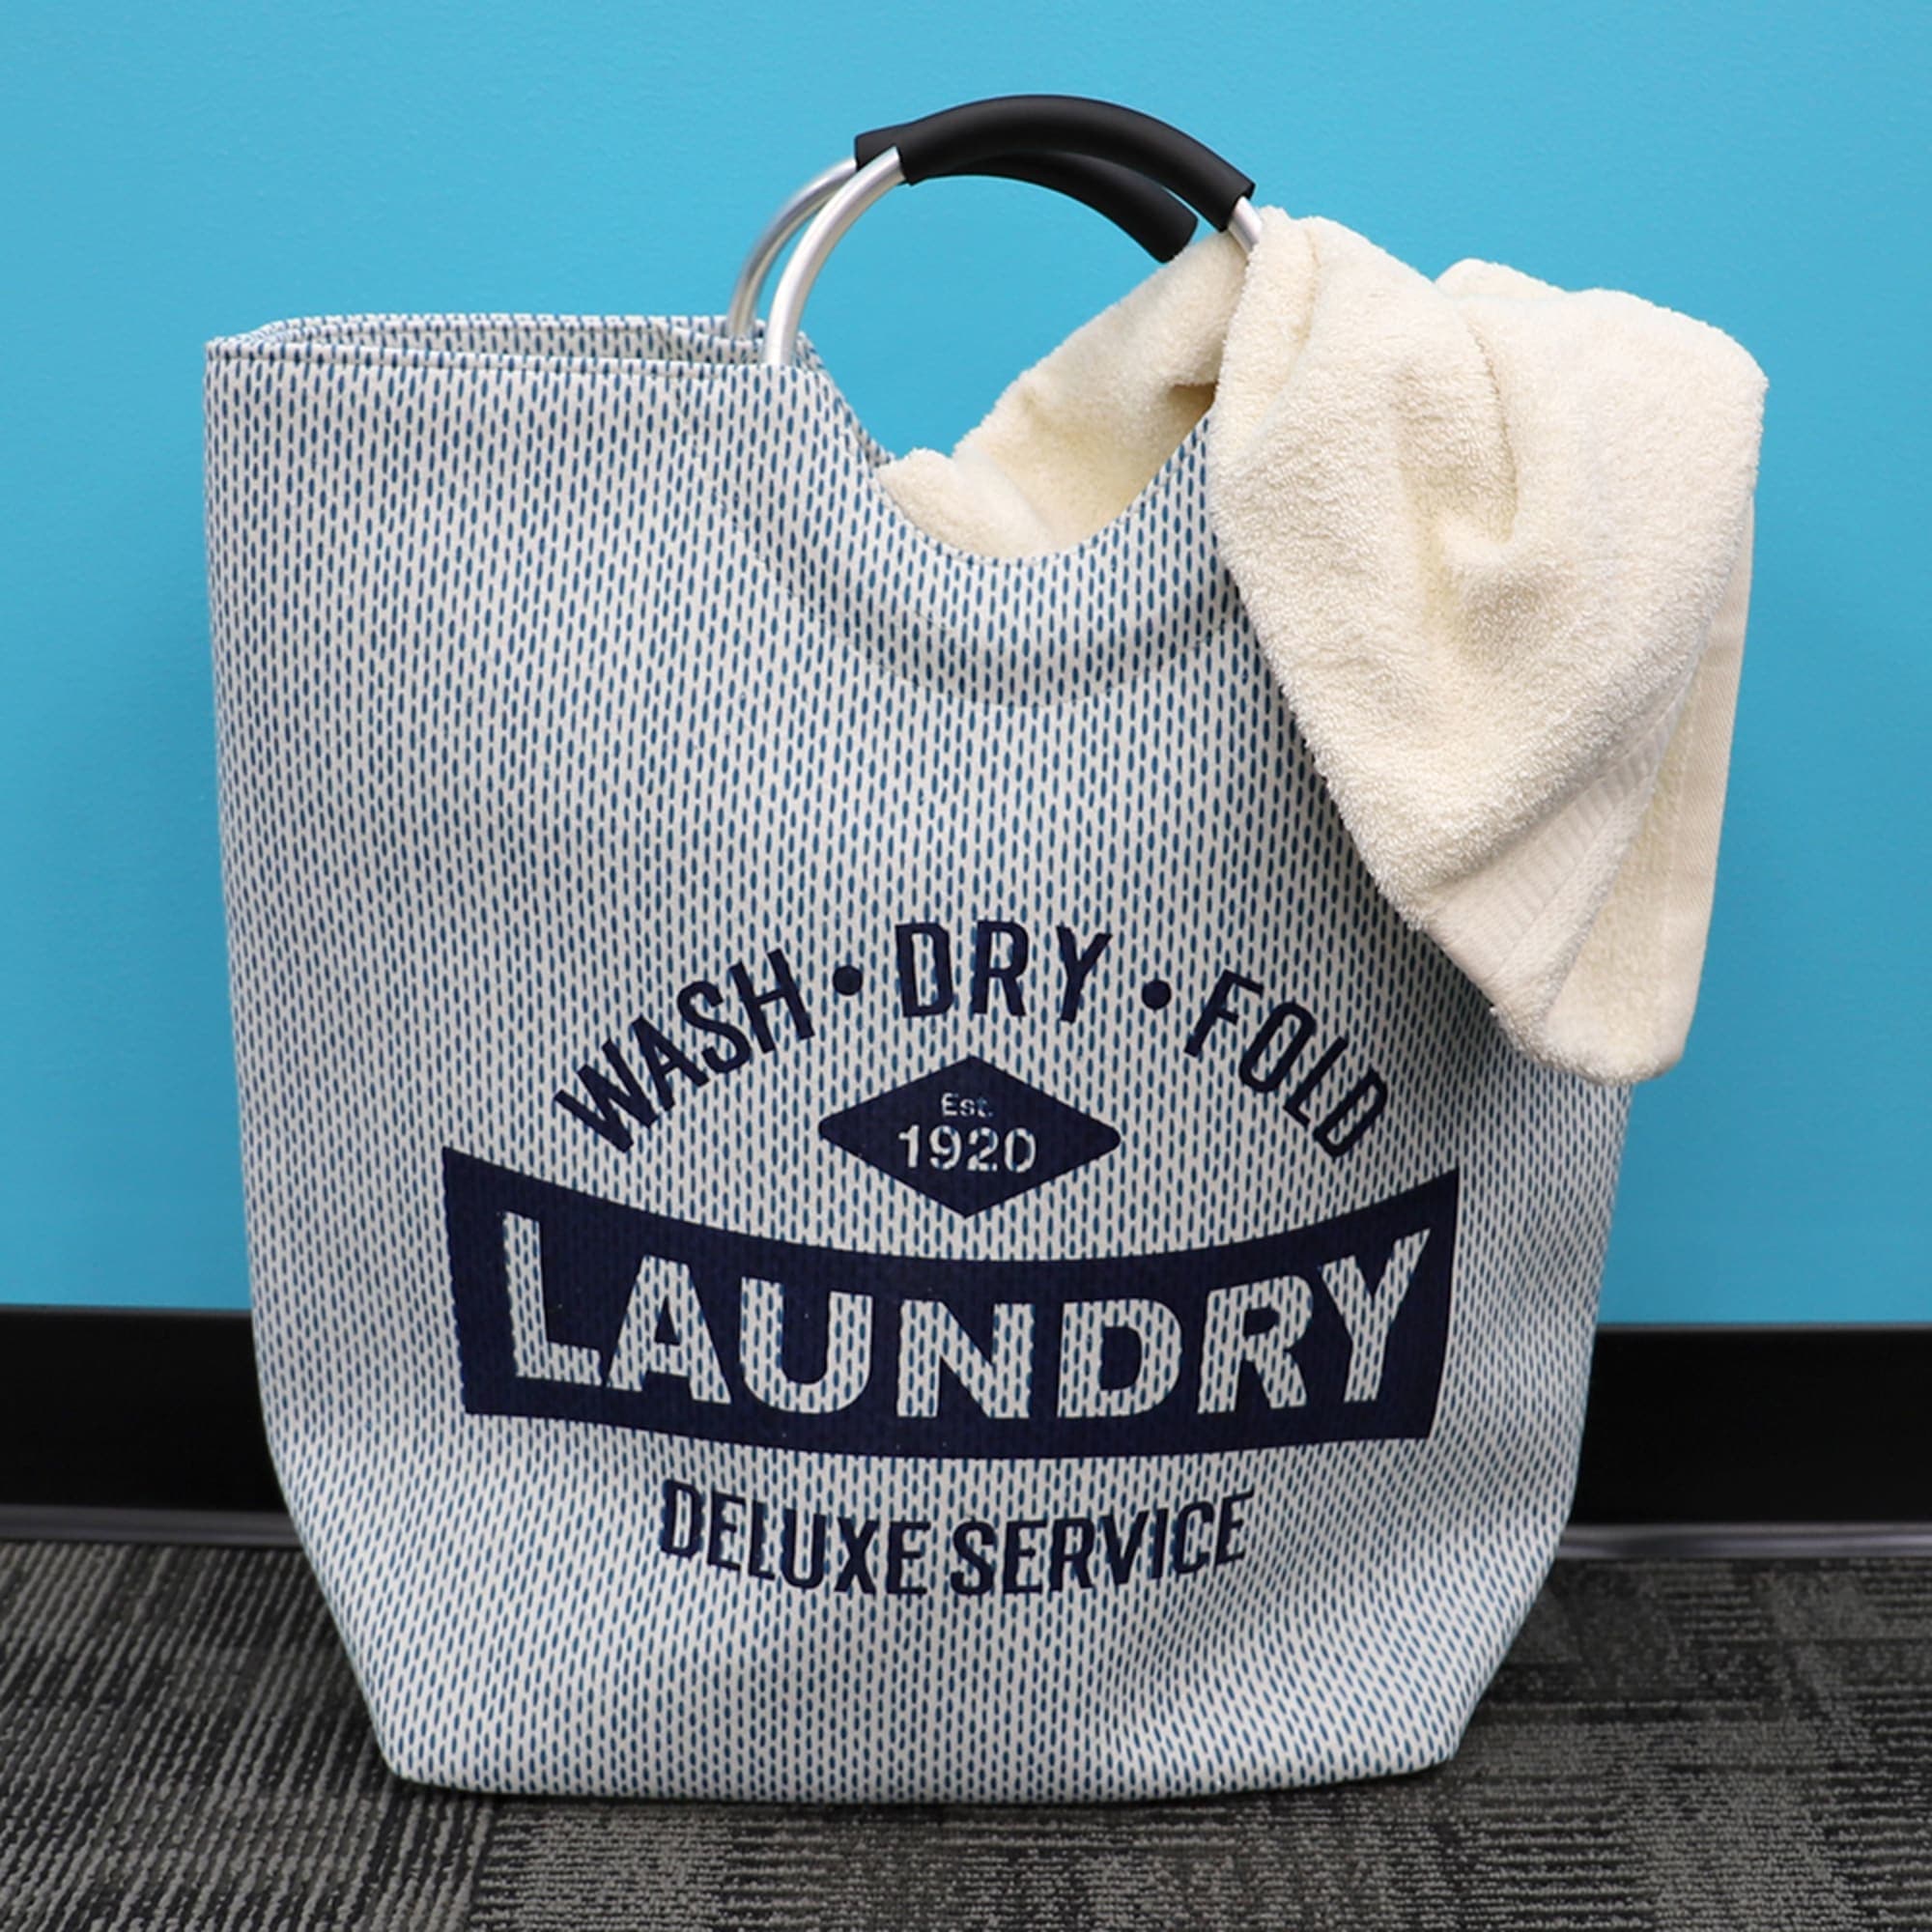 Home Basics Deluxe Service Wash Dry Fold Canvas Laundry Tote with Soft Grip Padded Aluminum Handles, Blue $12 EACH, CASE PACK OF 6